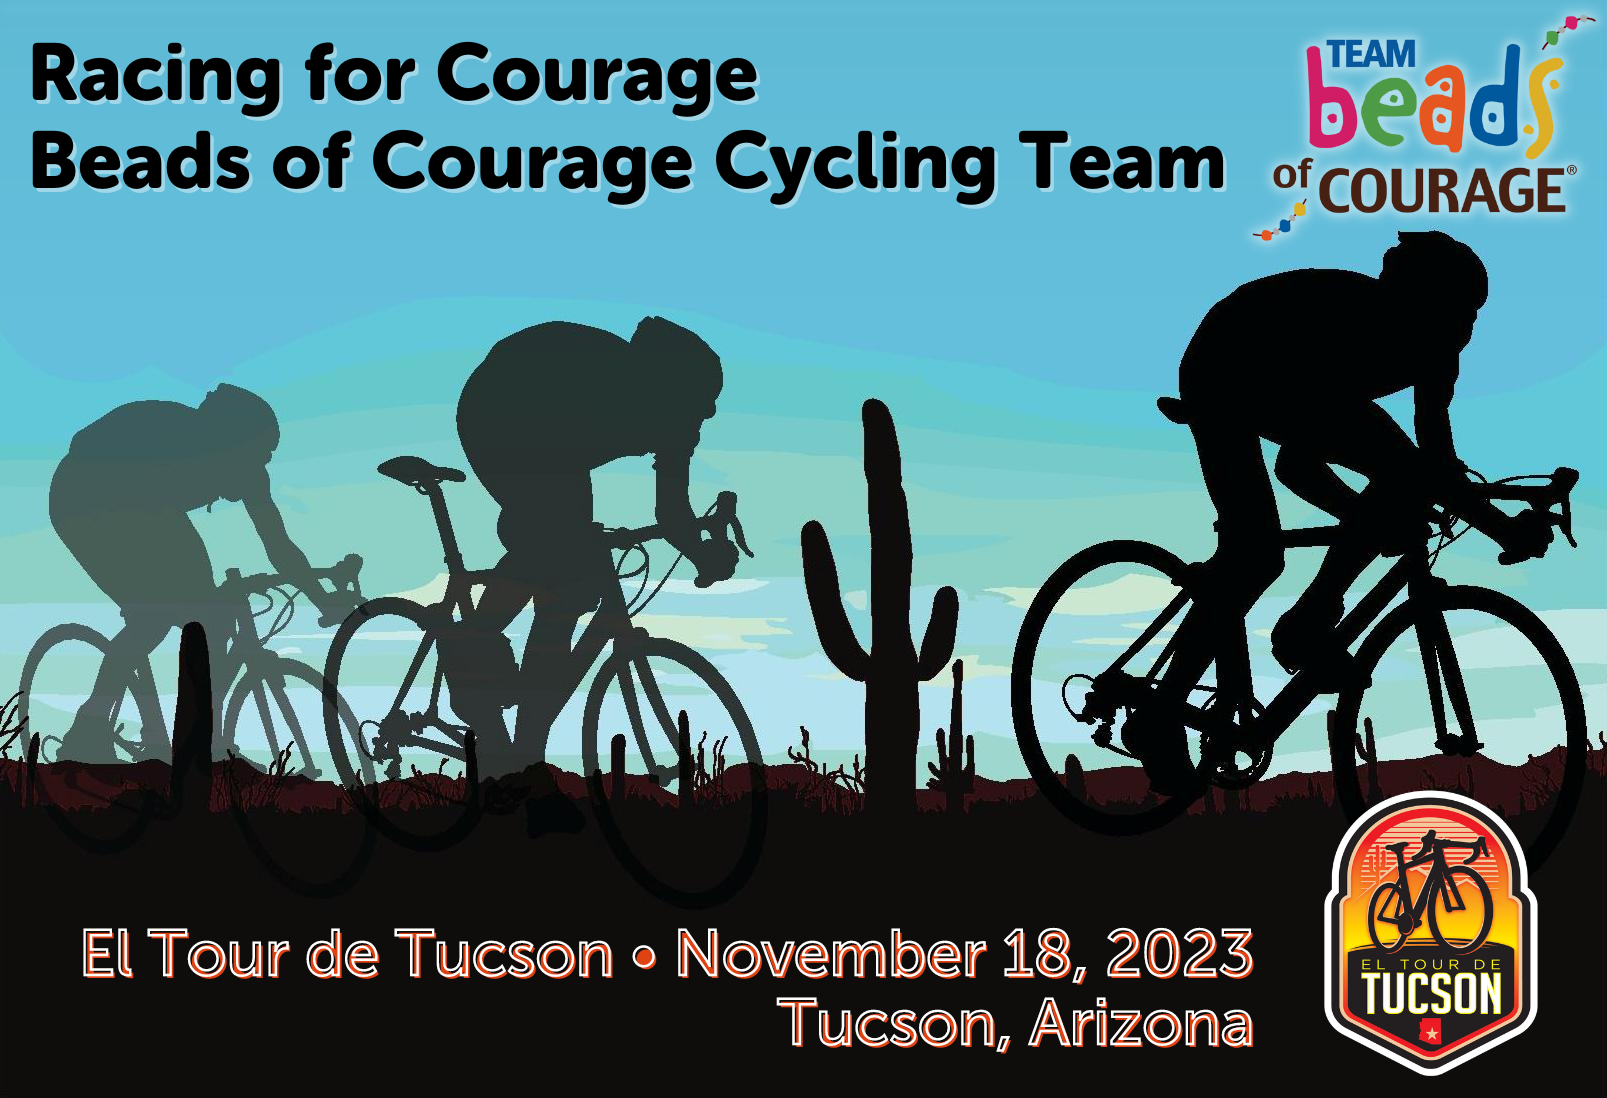 Racing for Courage. The Beads of Courage Cycling Team for El Tour de Tucson graphic